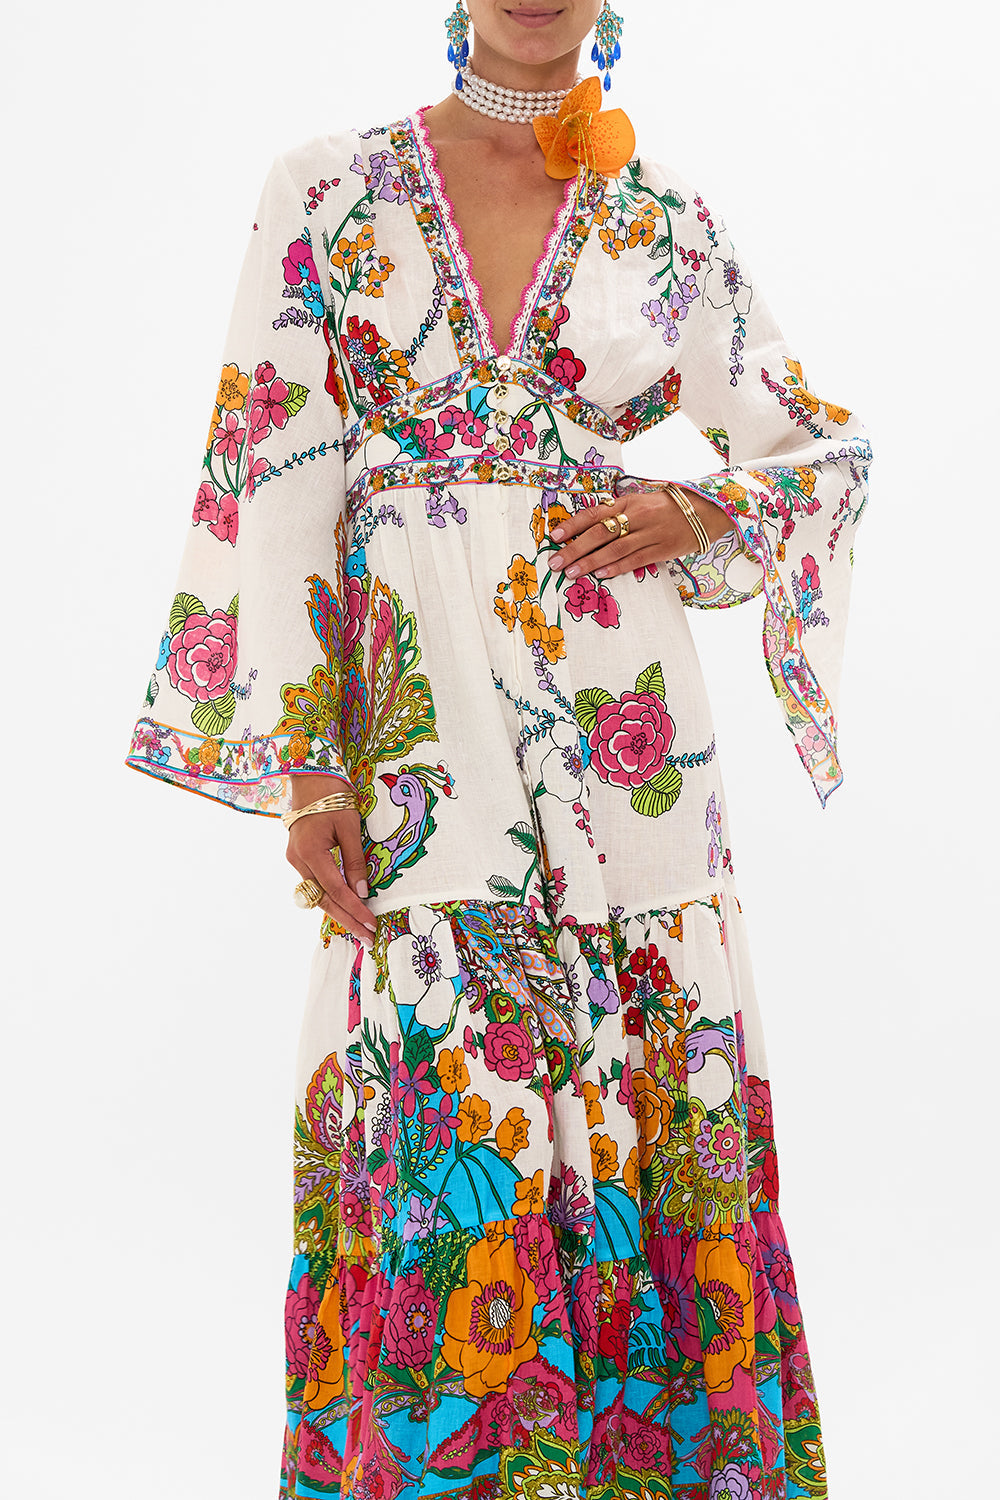 CAMILLA Floral Dress with Tiered Skirt in Cosmic Prairie